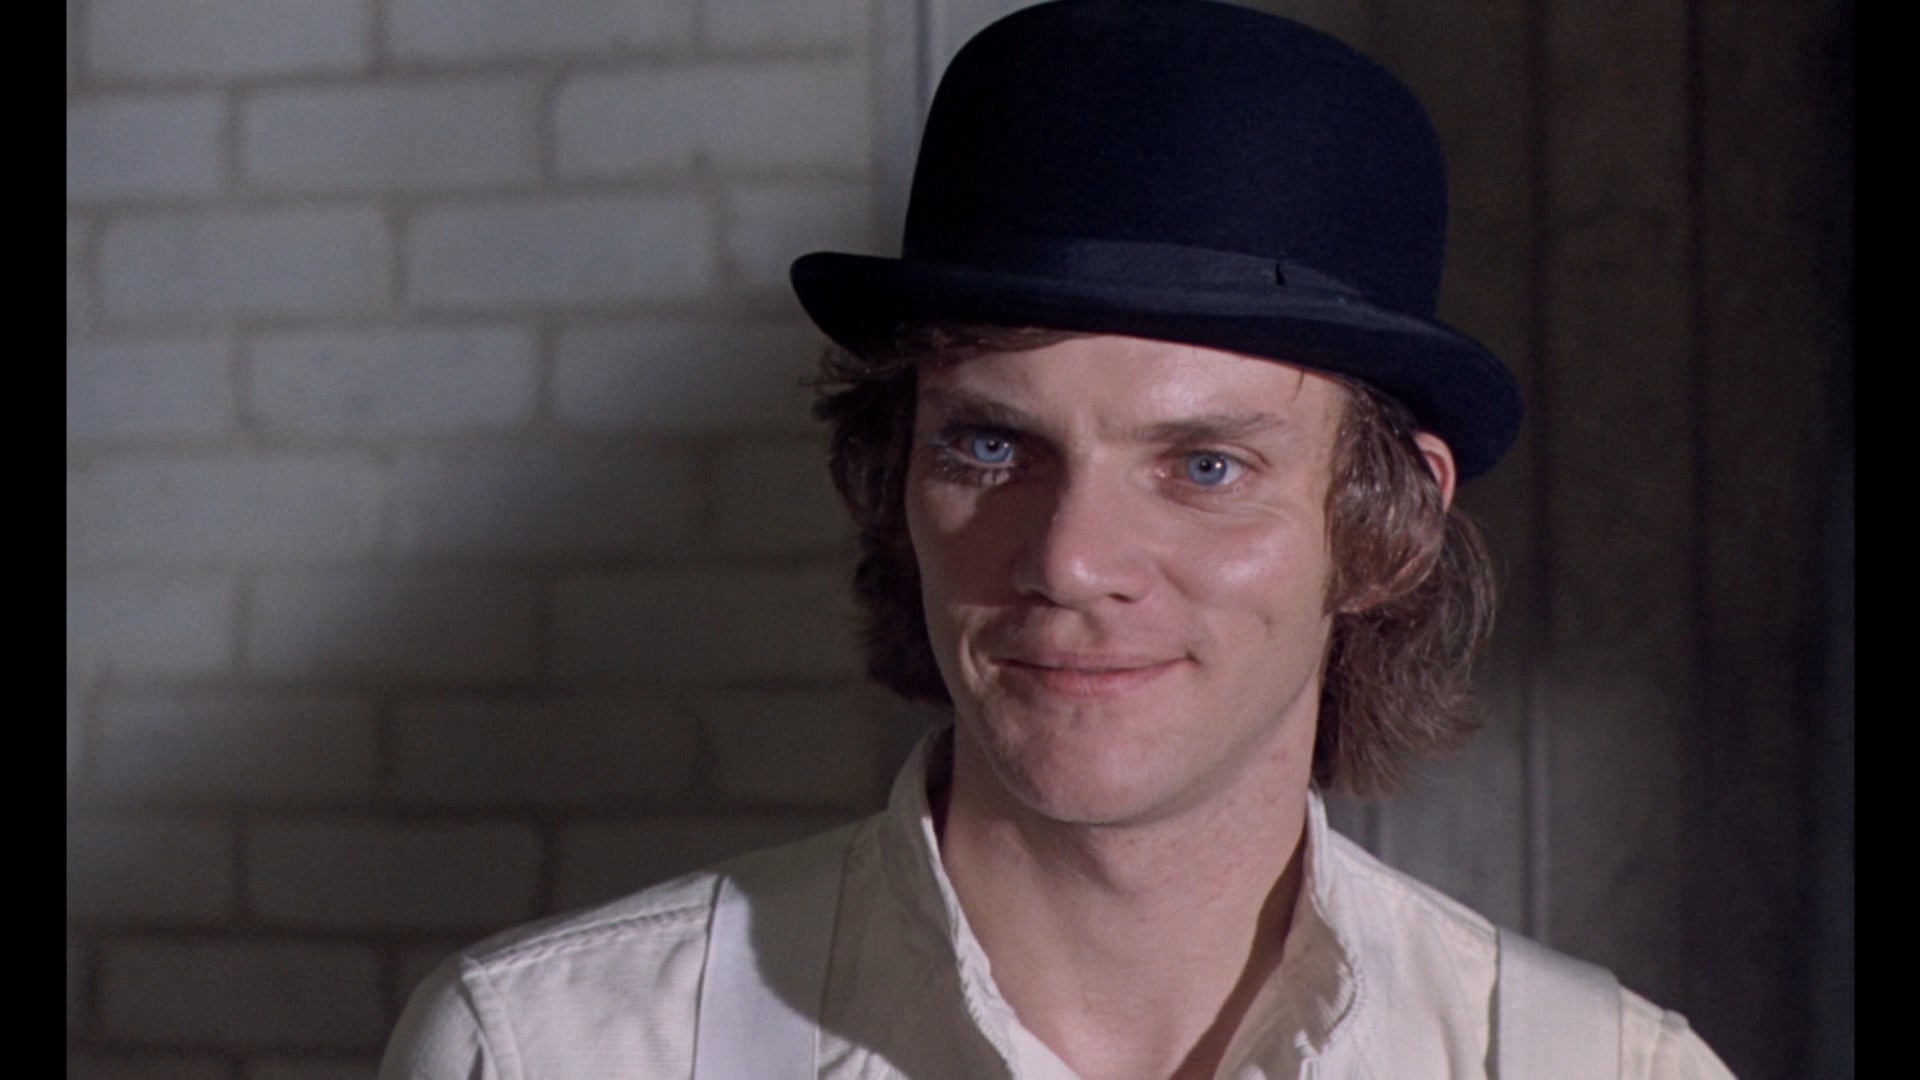 In A Clockwork Orange, despite Alex DeLarge's name he is not incredibly tall compared with other people